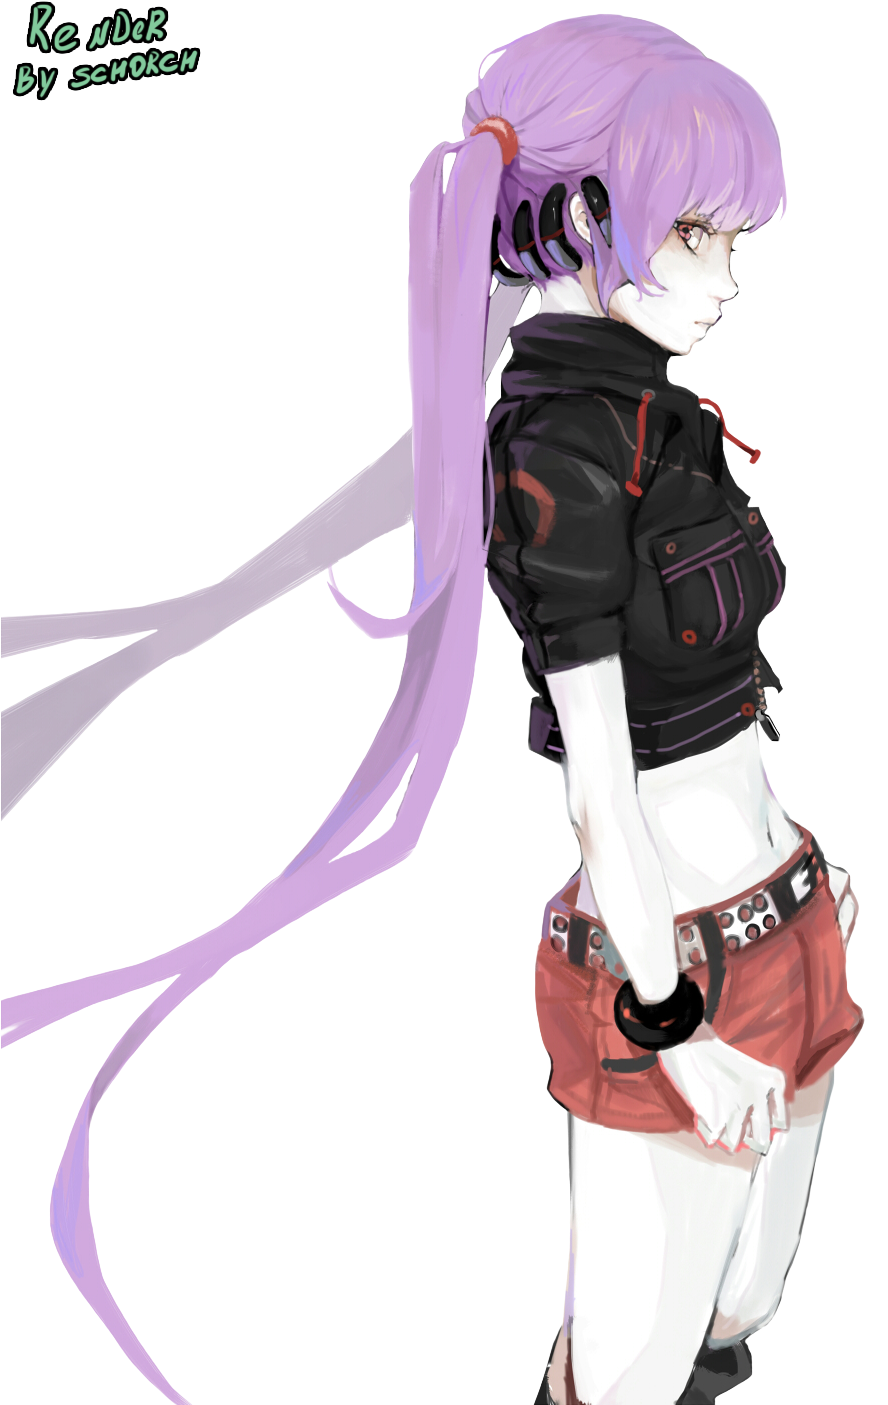 Anime Girl Purple Hair Render By Schorch2812-d821xxe - Anime Purple Hair Png (1000x1414), Png Download